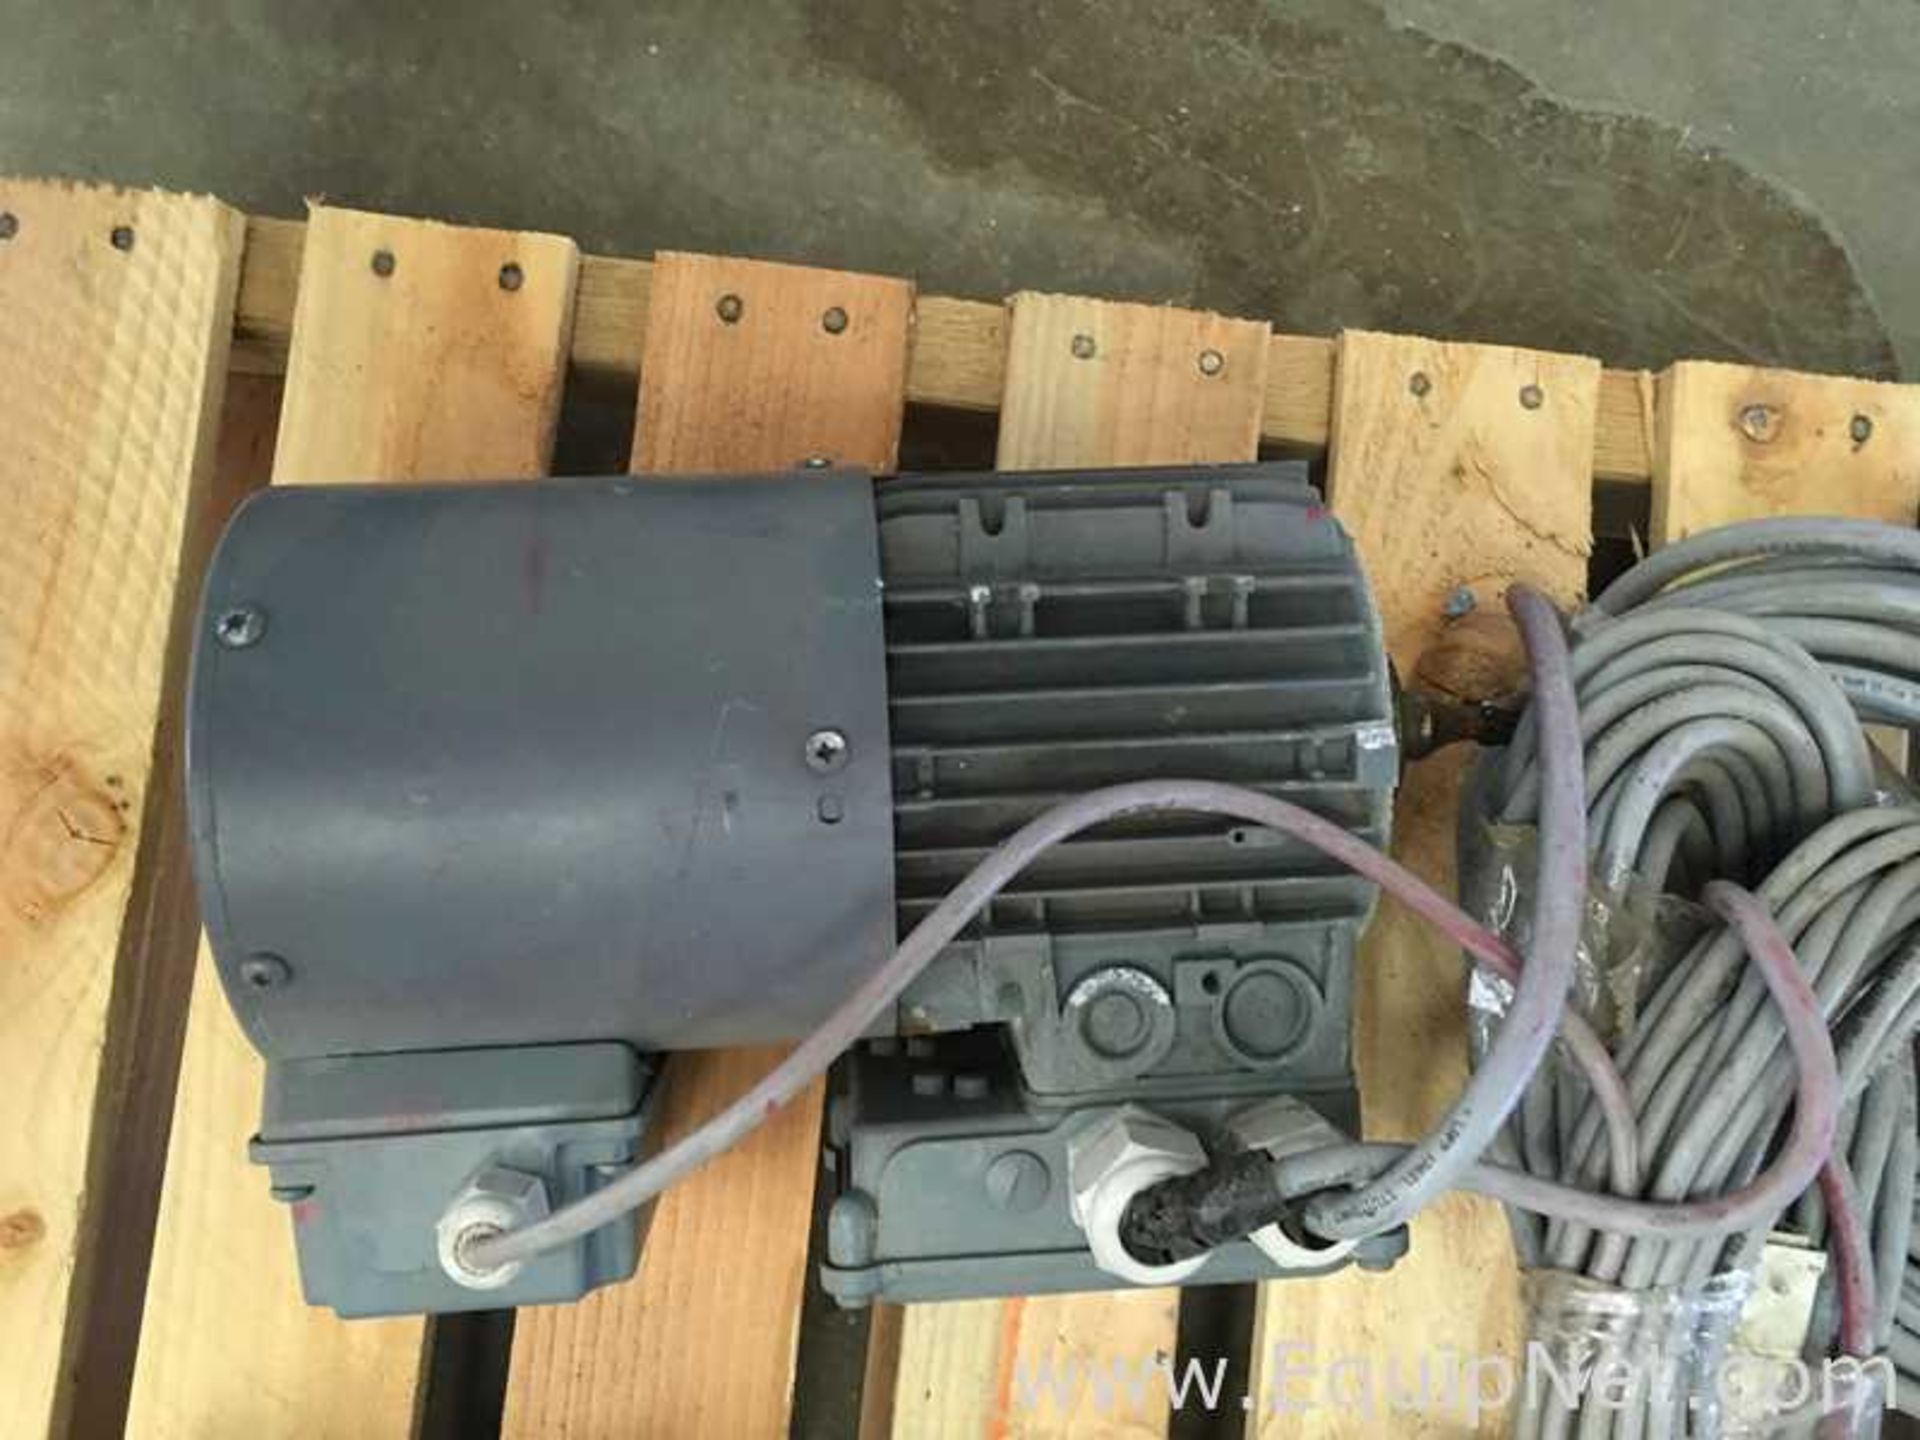 EQUIPNET LISTING #601009; REMOVAL COST: $0; DESCRIPTION: Nord 0.75 HP Electric Motor - Image 2 of 4